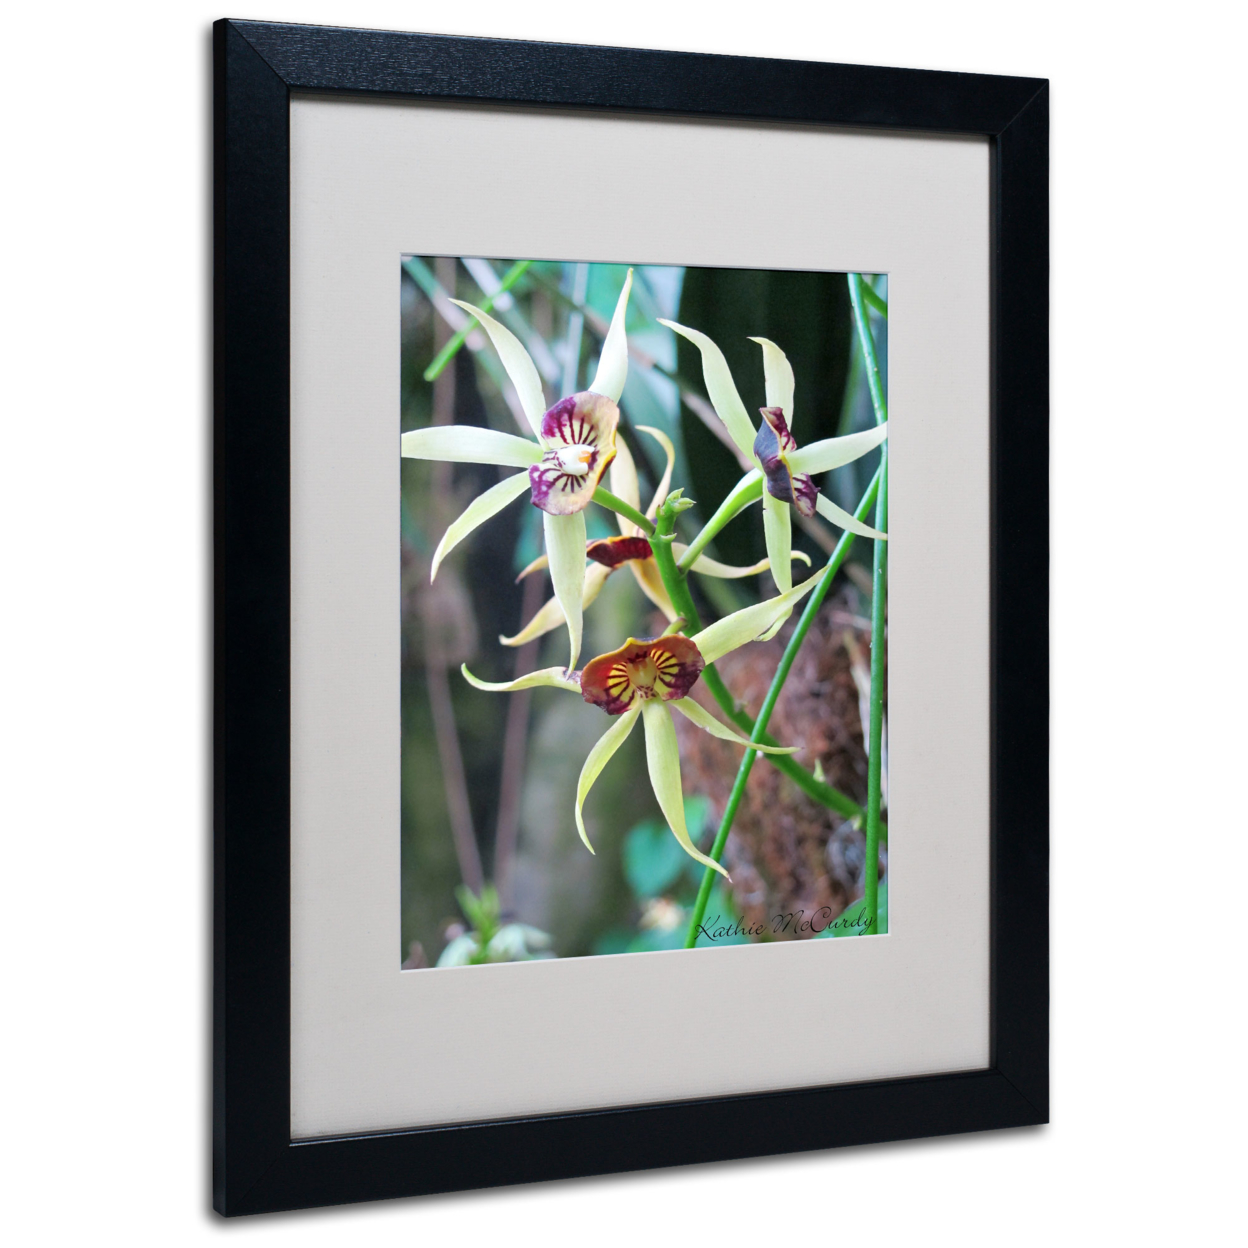 Kathie McCurdy 'Orchids I' Black Wooden Framed Art 18 X 22 Inches